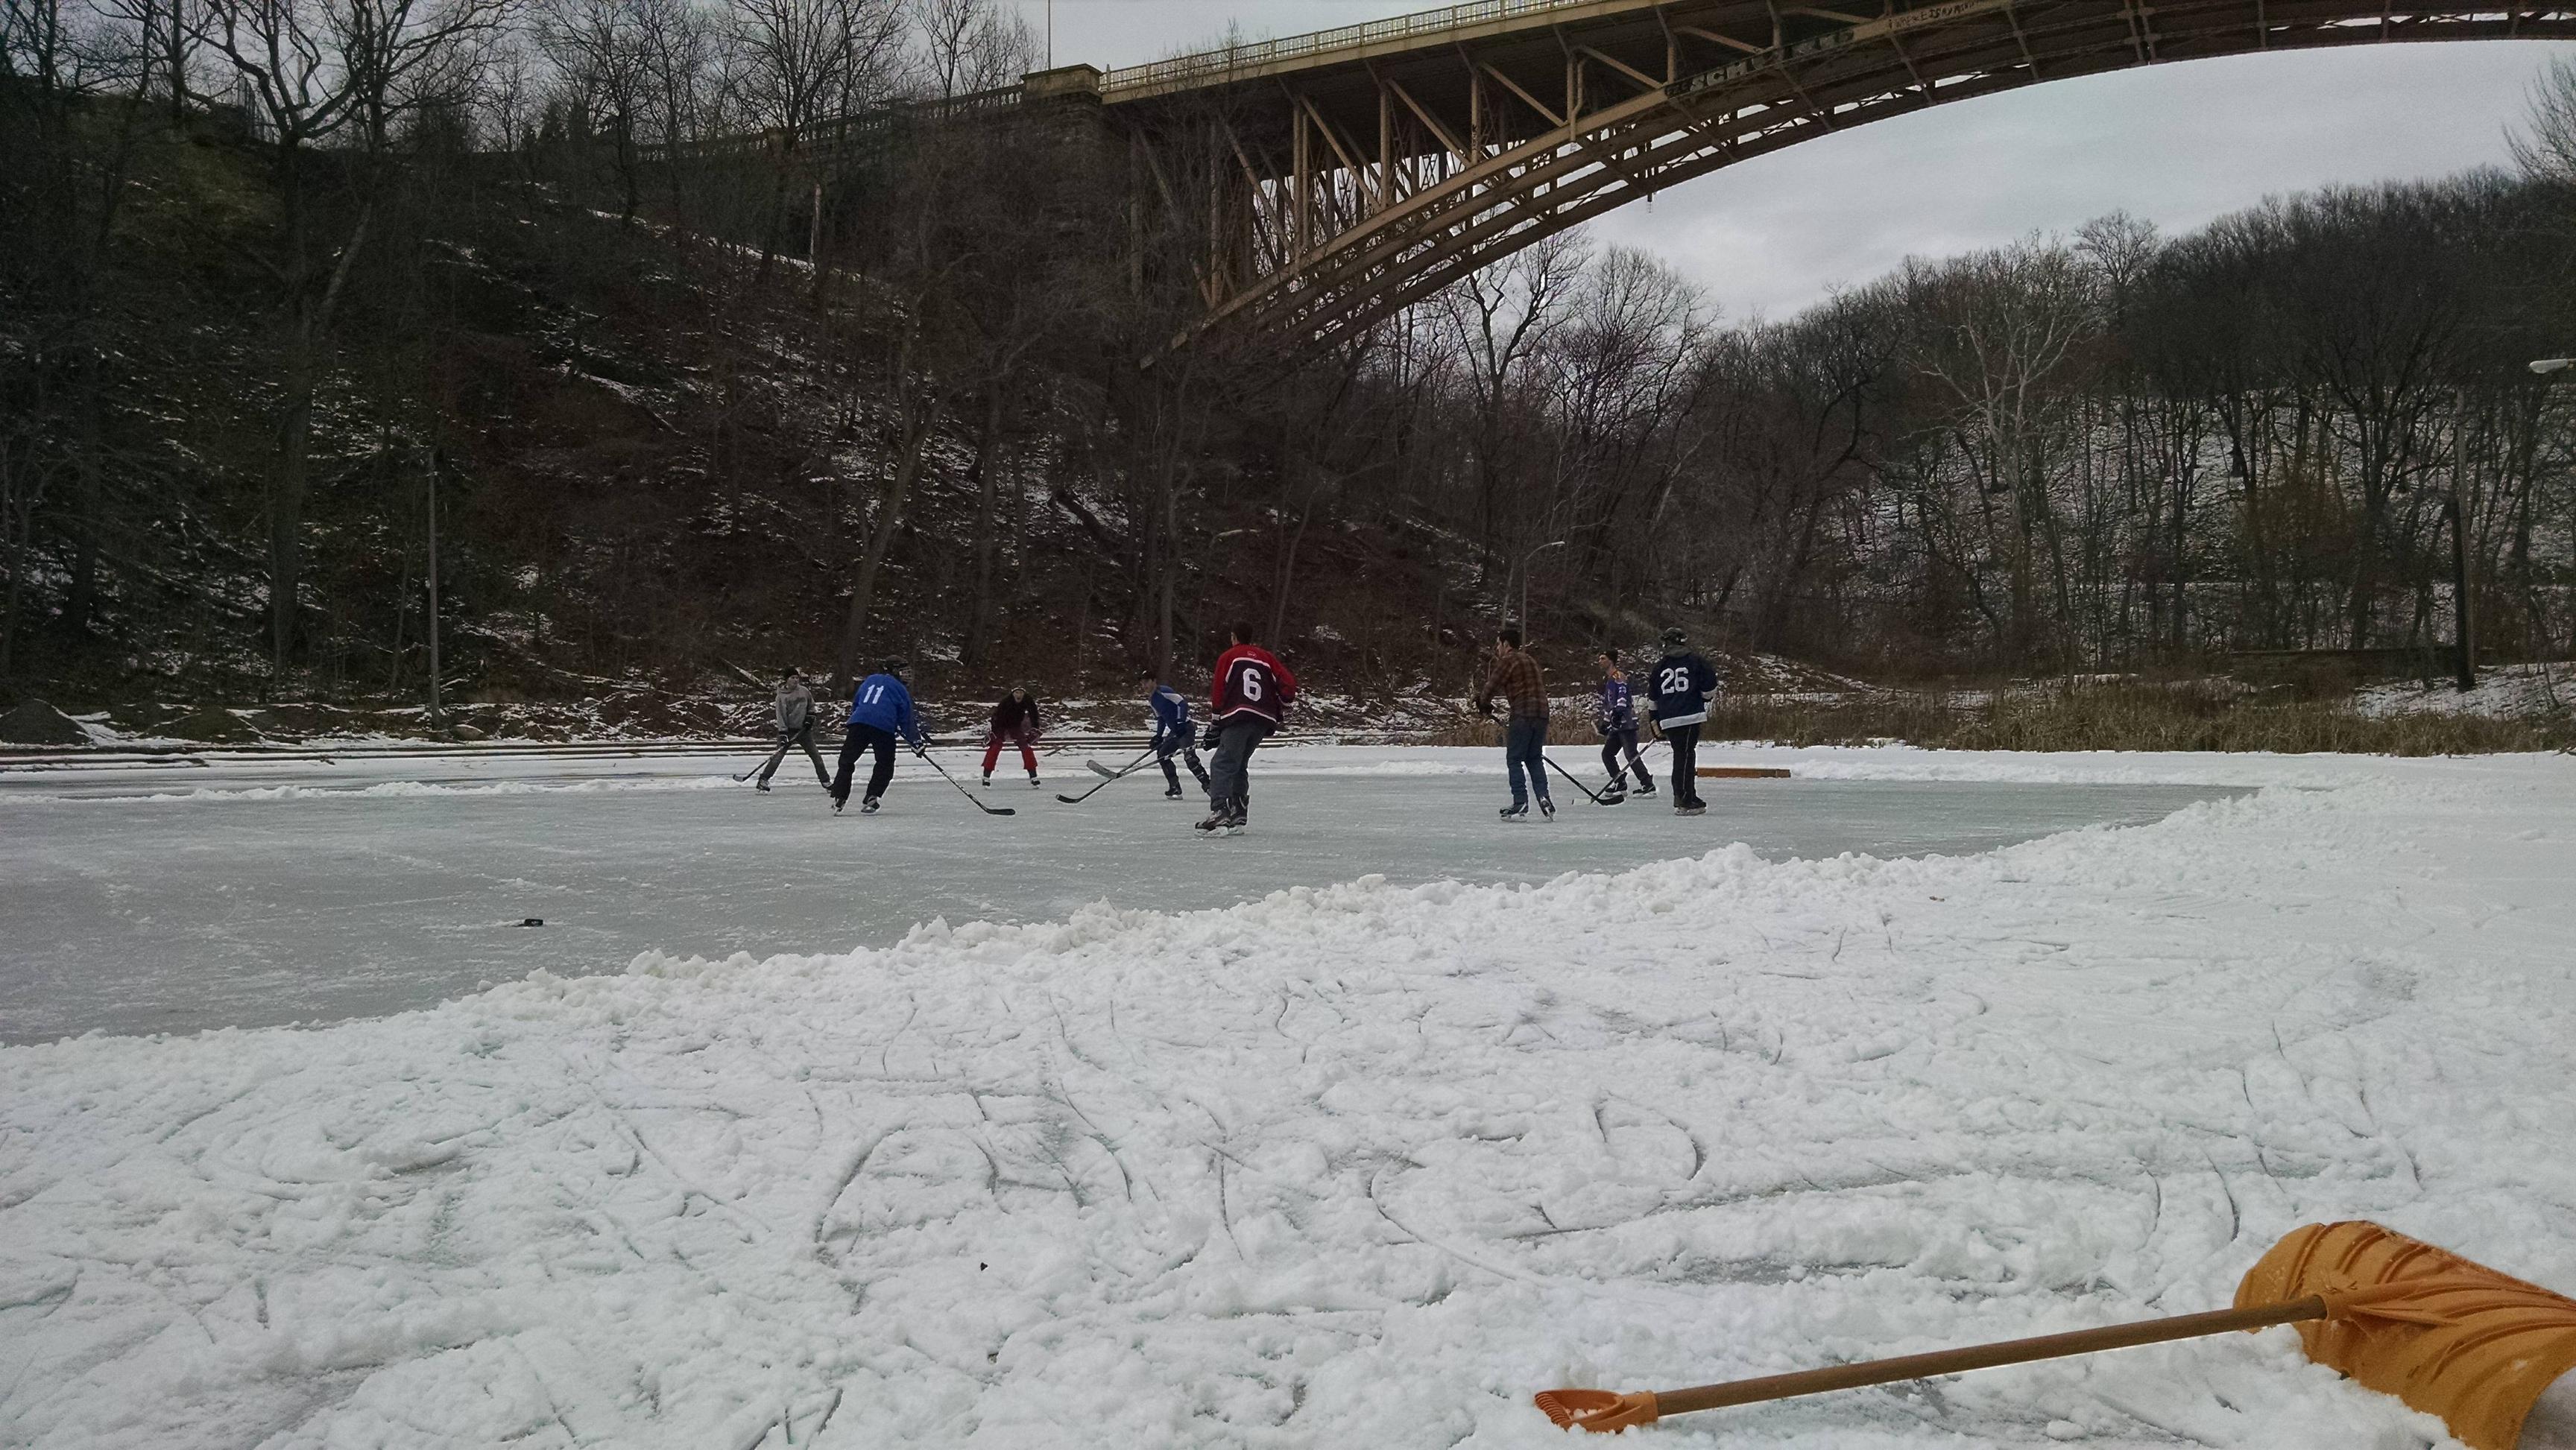 Some friends playing hockey at a frozen pond in Pittsburgh. : hockey